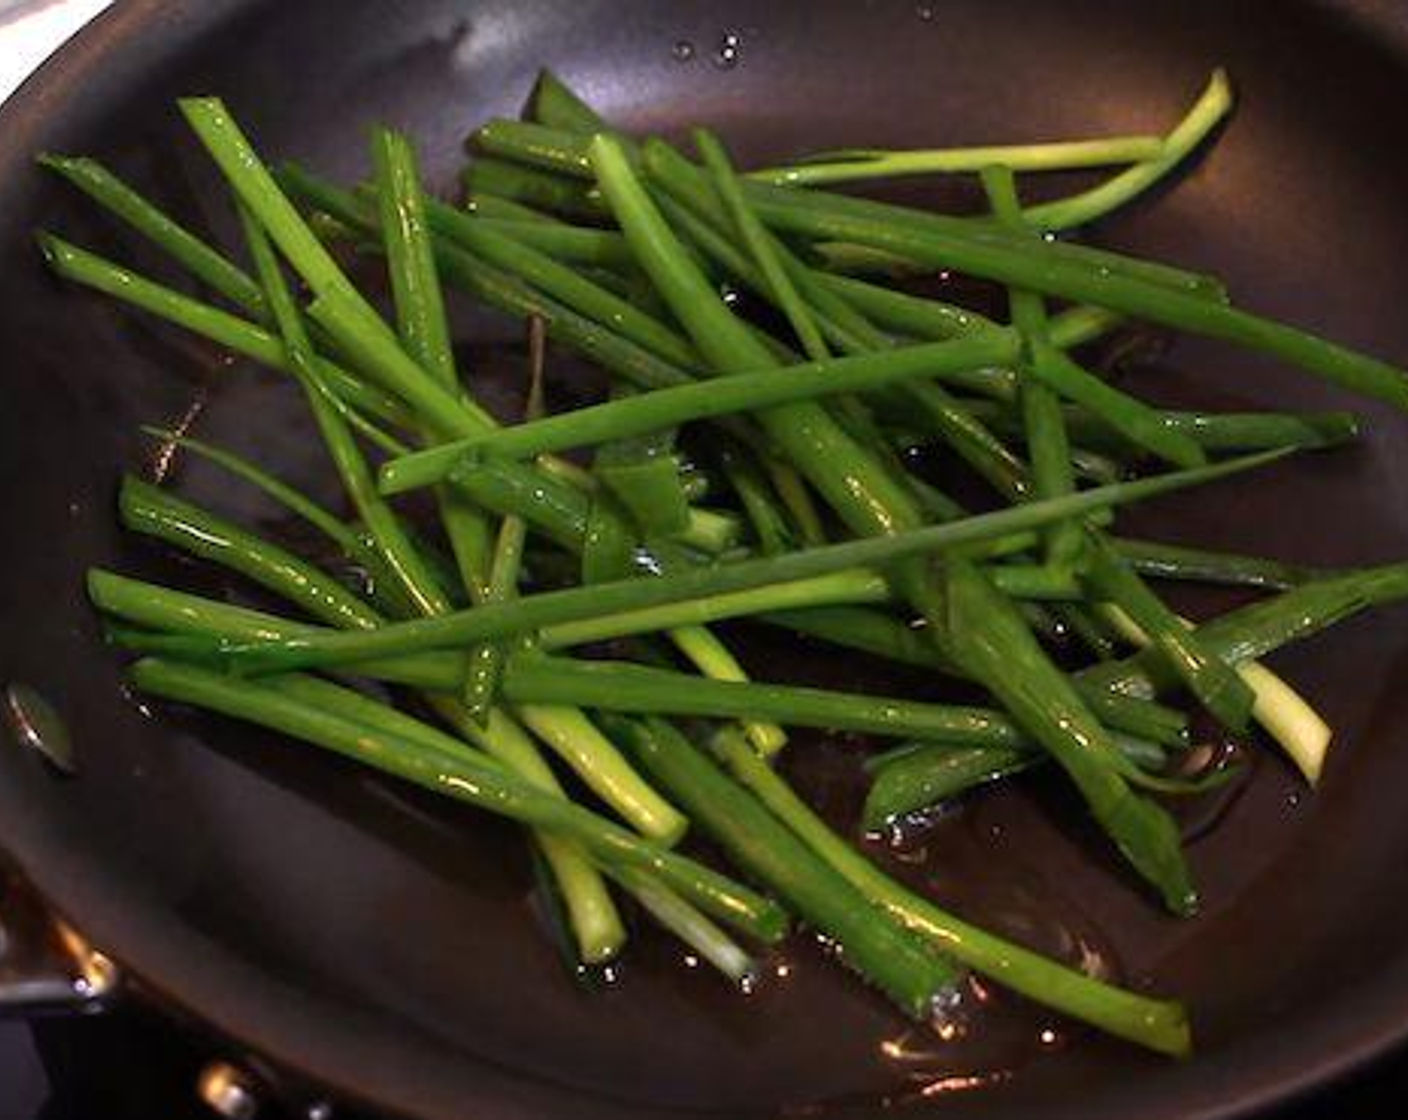 step 2 Heat Vegetable Oil (1/2 tsp) in a pan or wok over high heat and cook the Chinese Chives (1/3 cup) until wilted. Transfer the garlic chives into the bowl with the egg mixture.